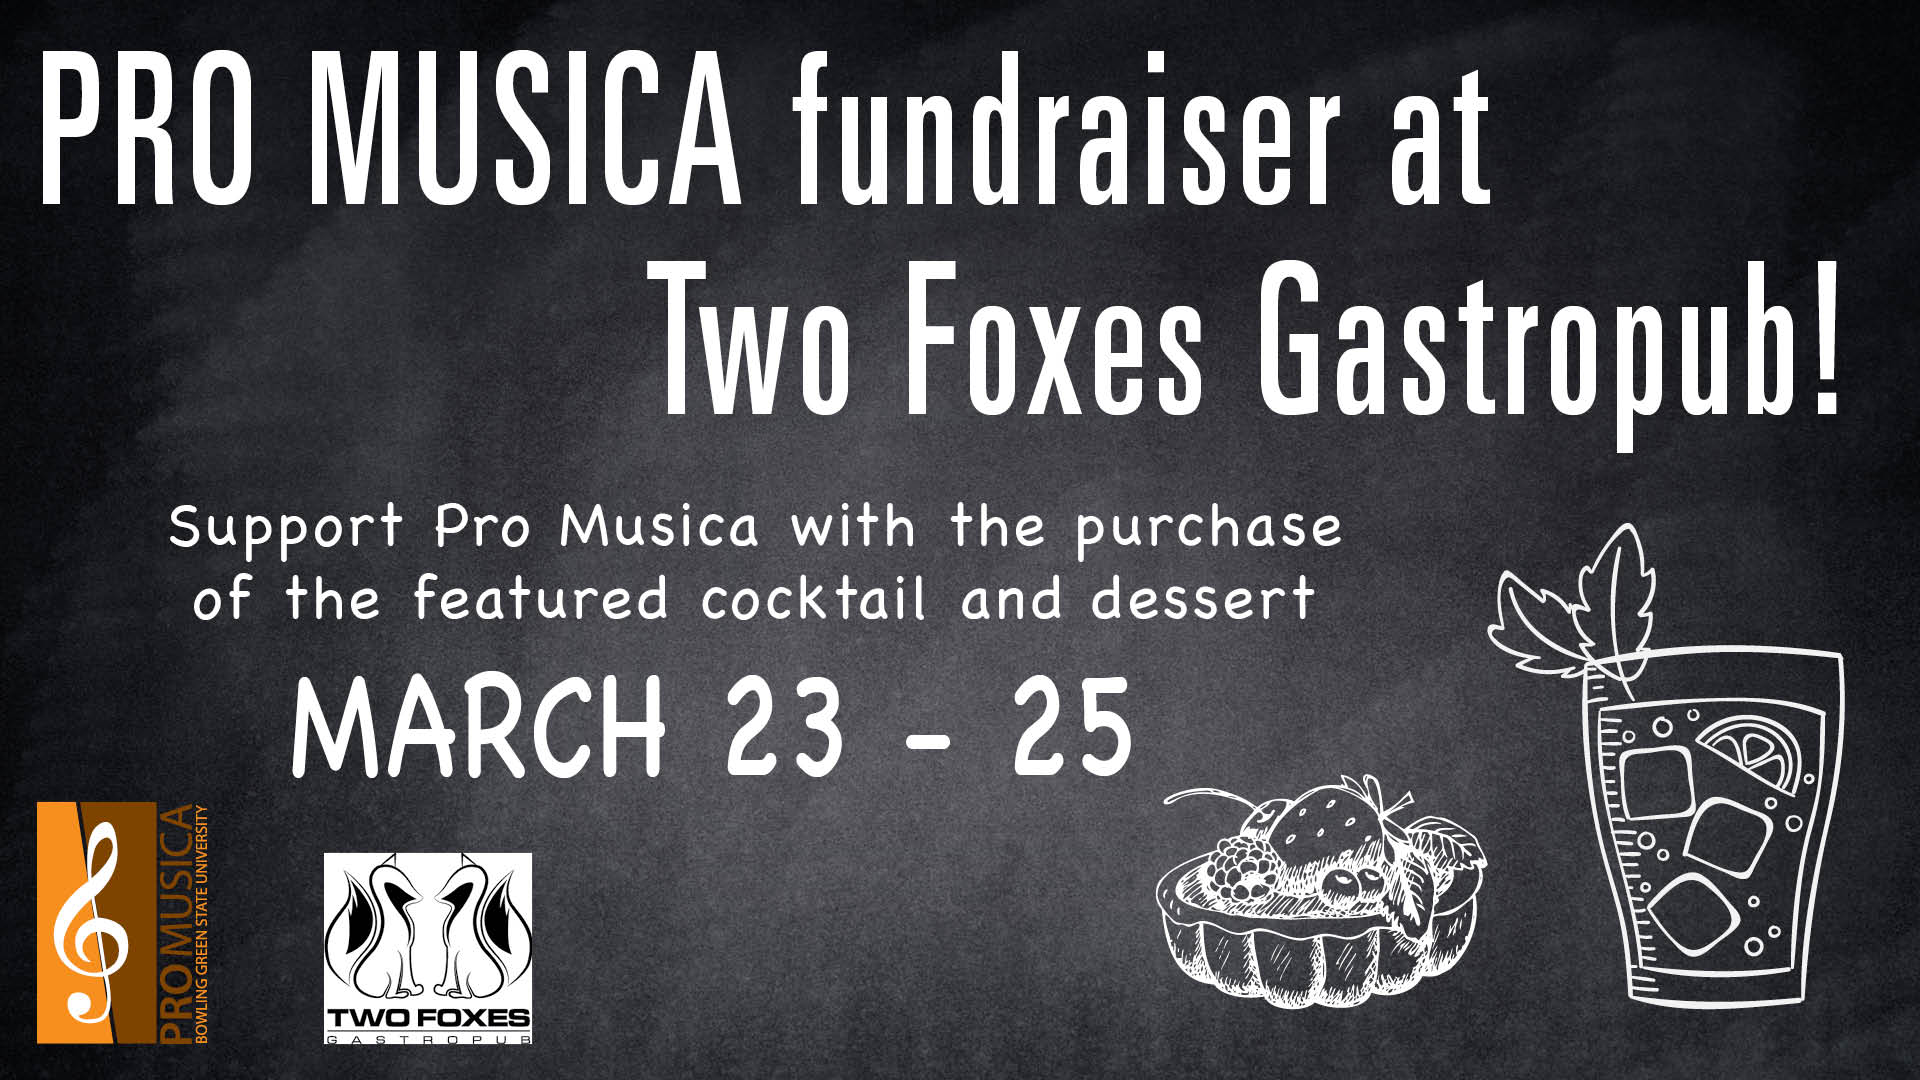 pro-musica-fundraiser-two-foxes